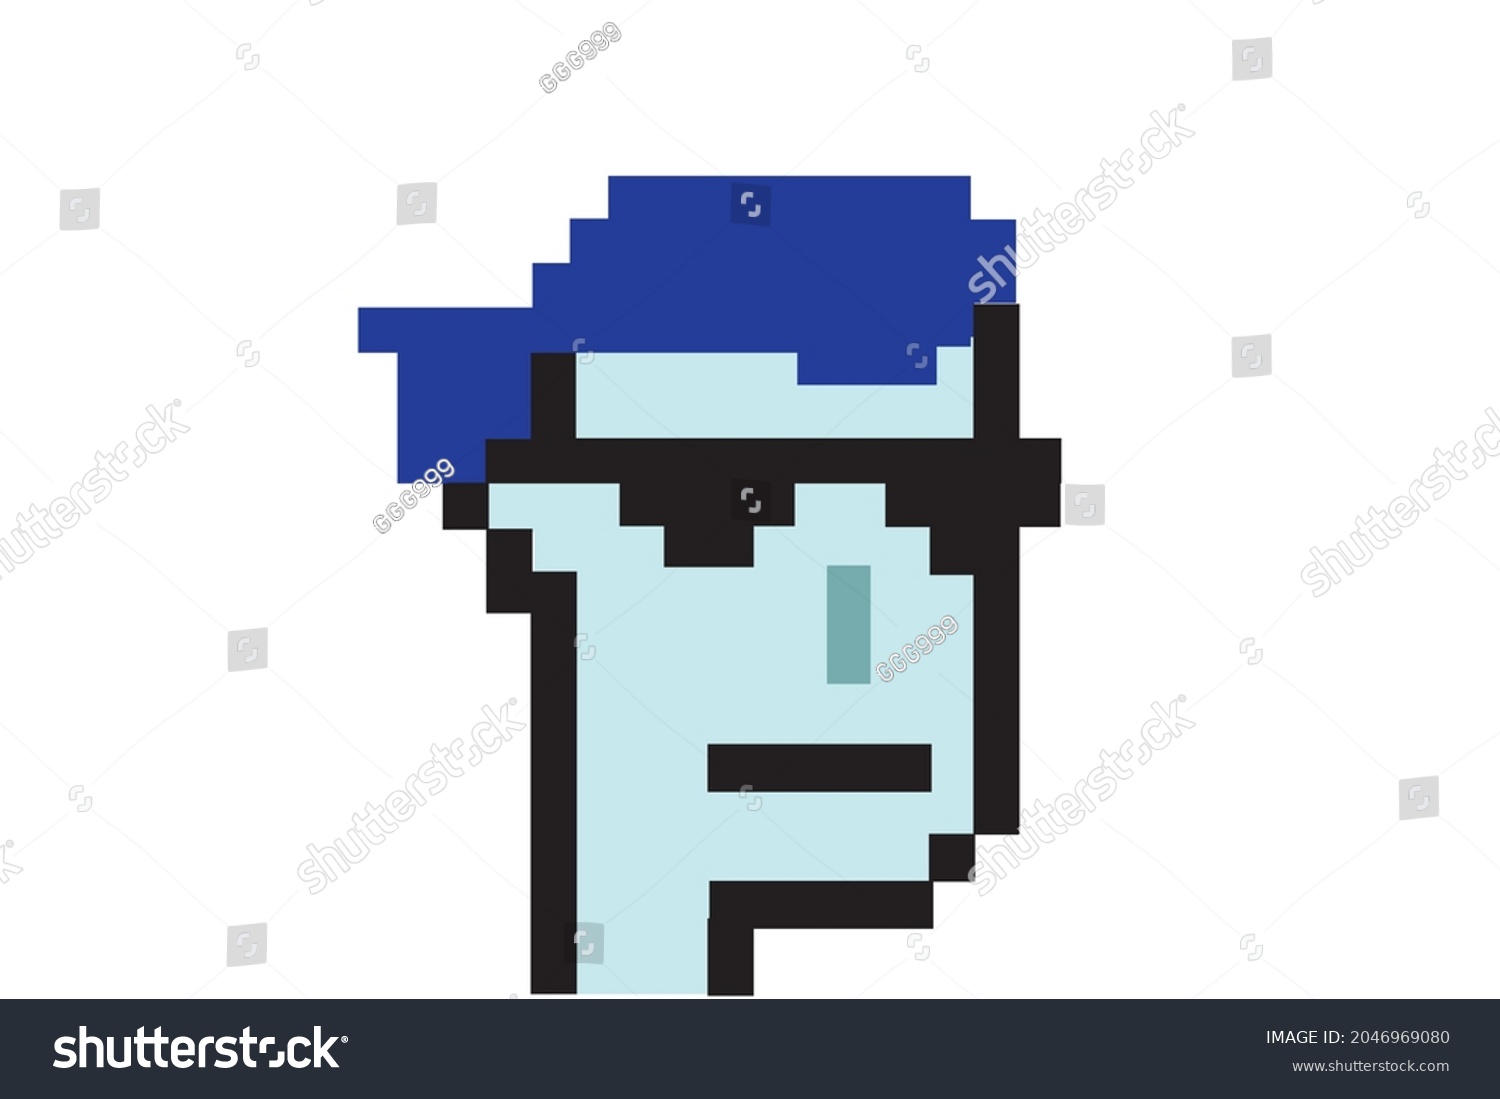 SVG of Cryptopunk NFT blockchain, non fungible token. Pixel art character white background svg